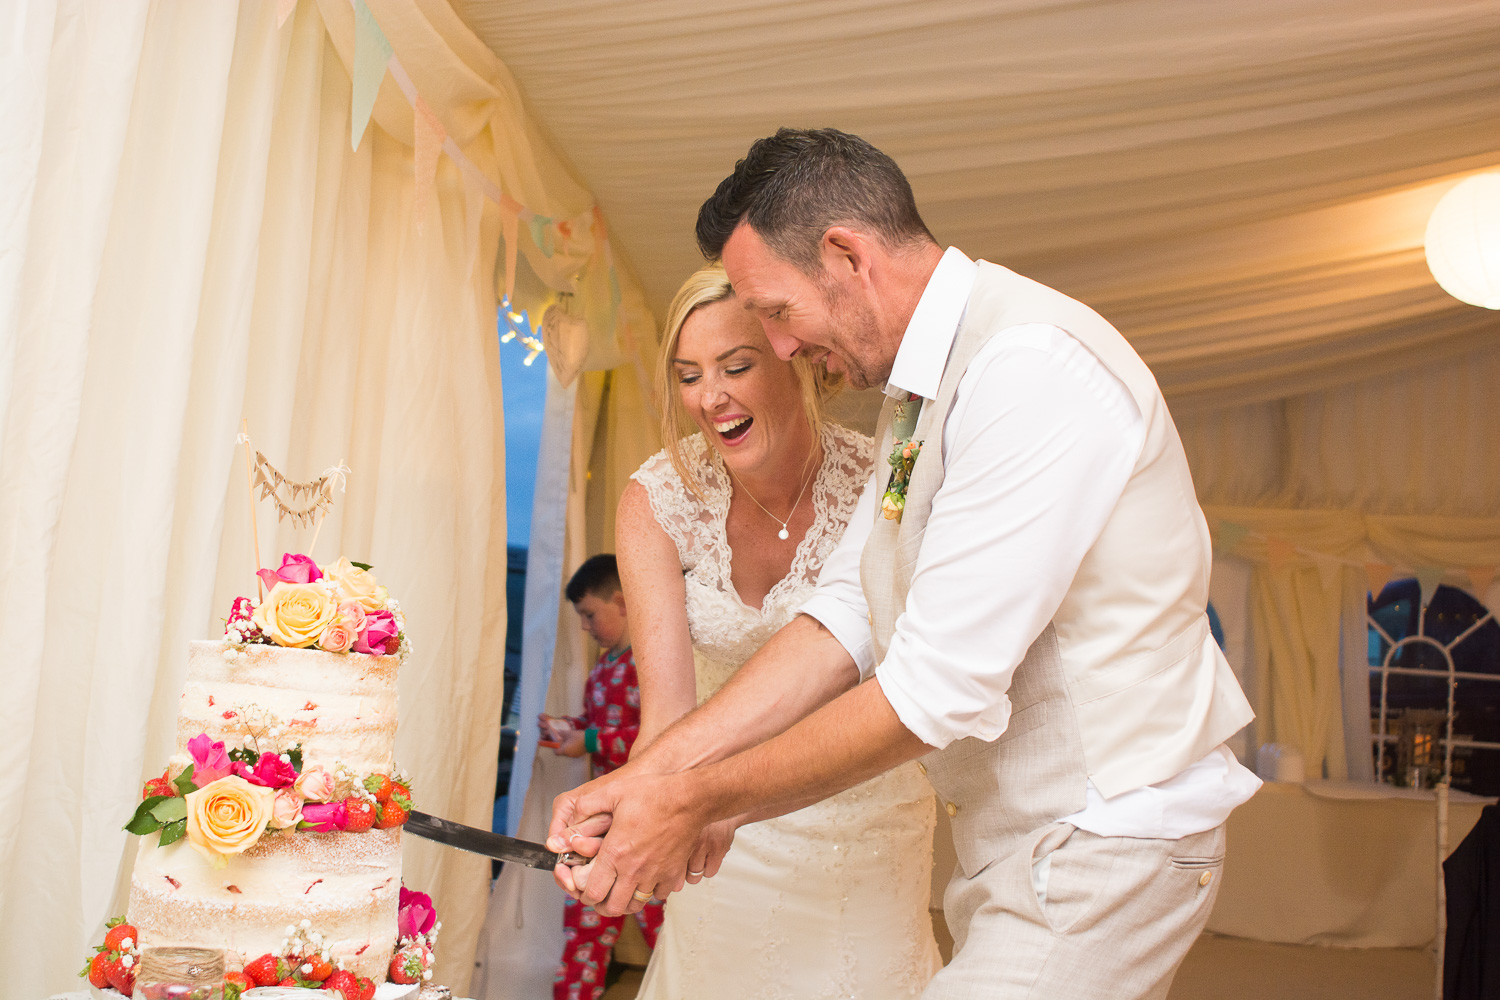 cutting the cake at their woolacombe wedding